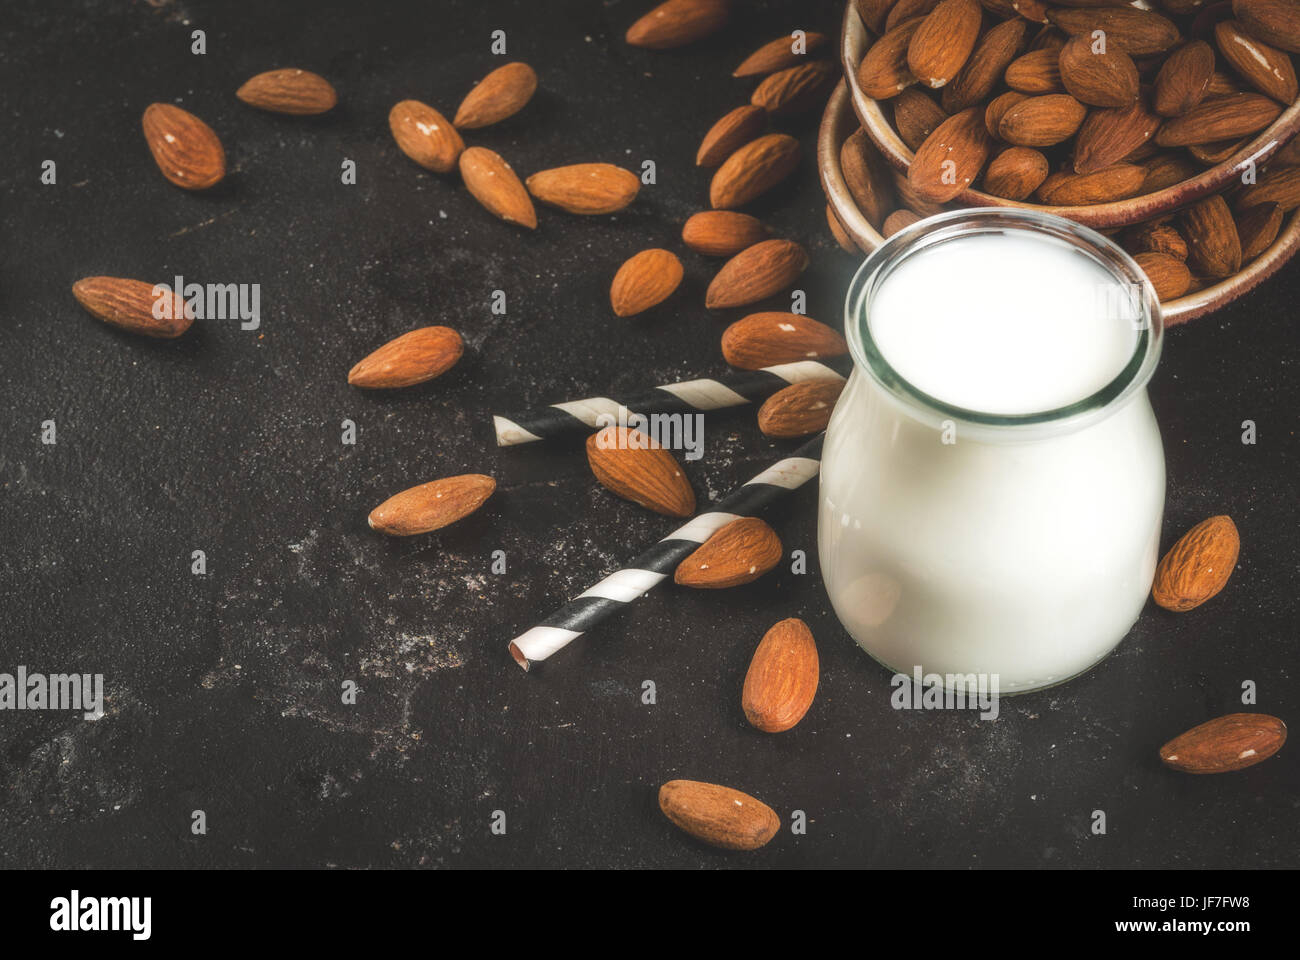 Vegetable sources of protein. Vegan healthy food. A small bottle of almond milk, portion. Against the backdrop of nuts, almonds, on a black concrete t Stock Photo